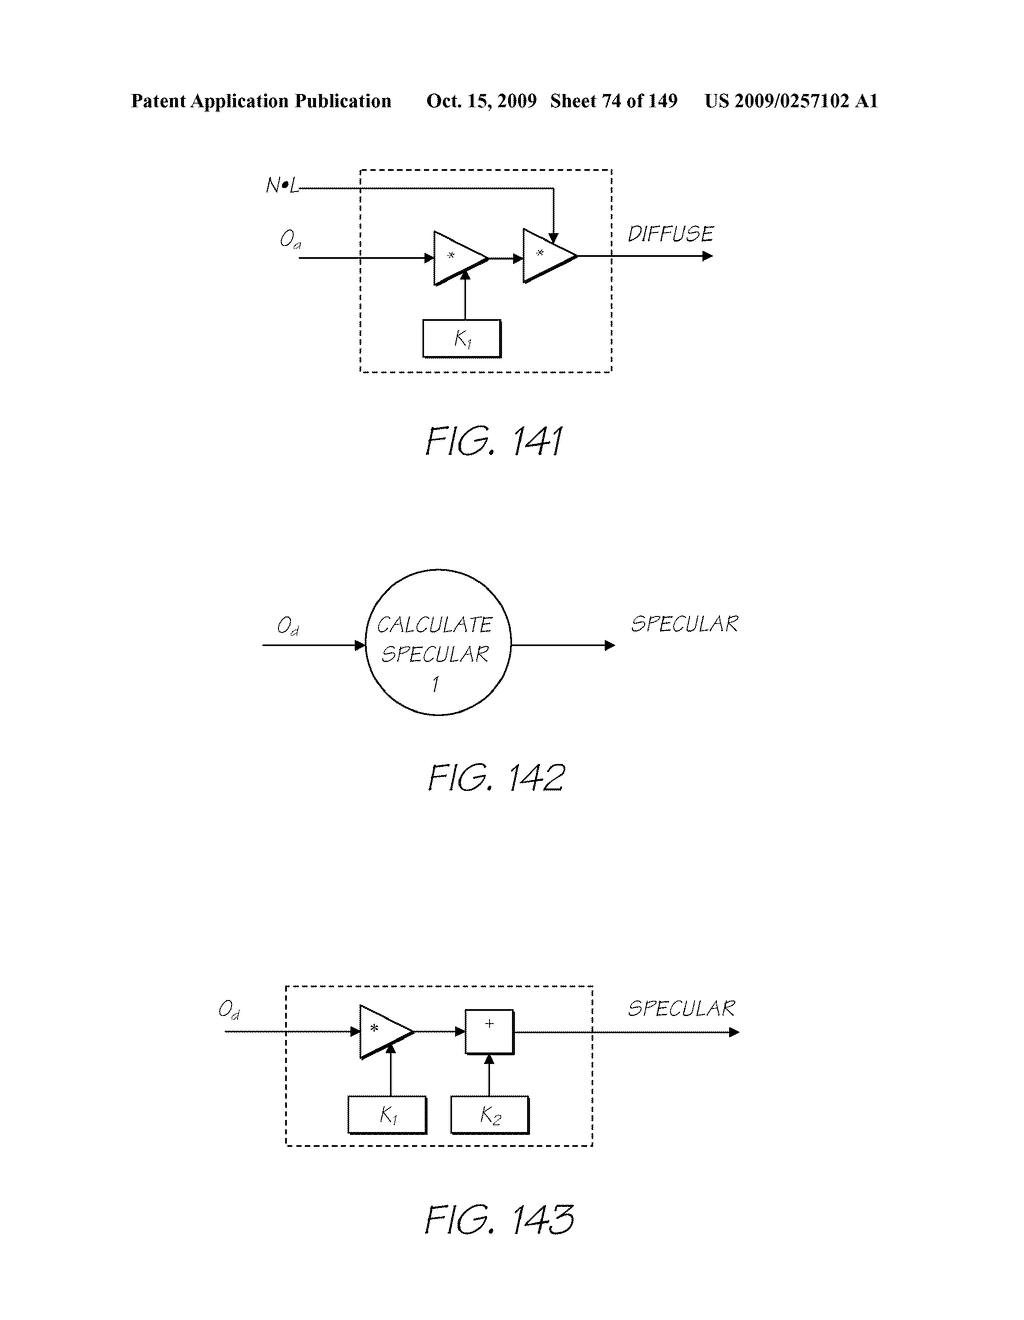 IMAGE PROCESSING APPARATUS HAVING CARD READER FOR APPLYING EFFECTS STORED ON A CARD TO A STORED IMAGE - diagram, schematic, and image 75